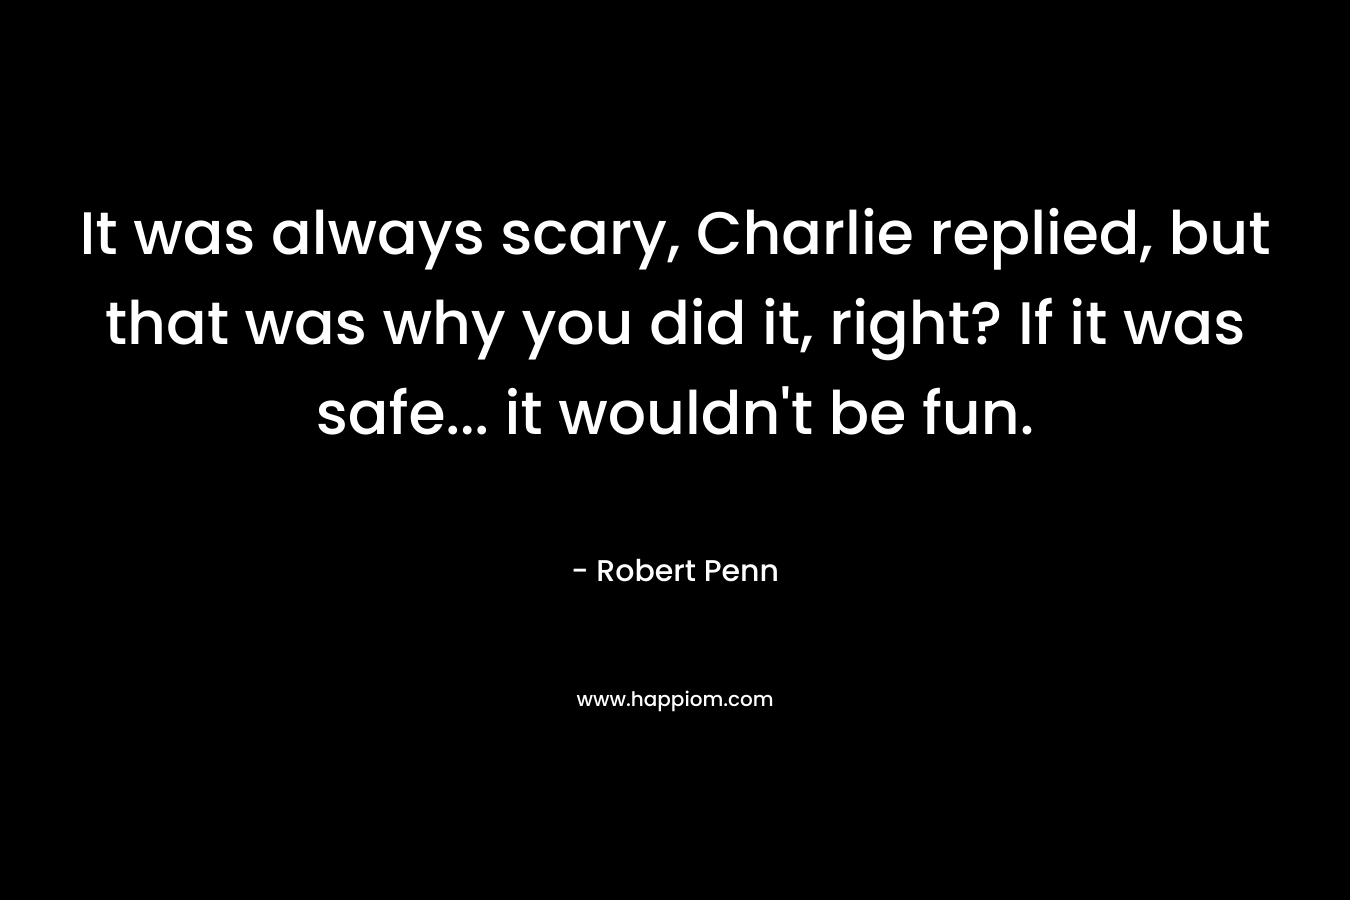 It was always scary, Charlie replied, but that was why you did it, right? If it was safe... it wouldn't be fun.